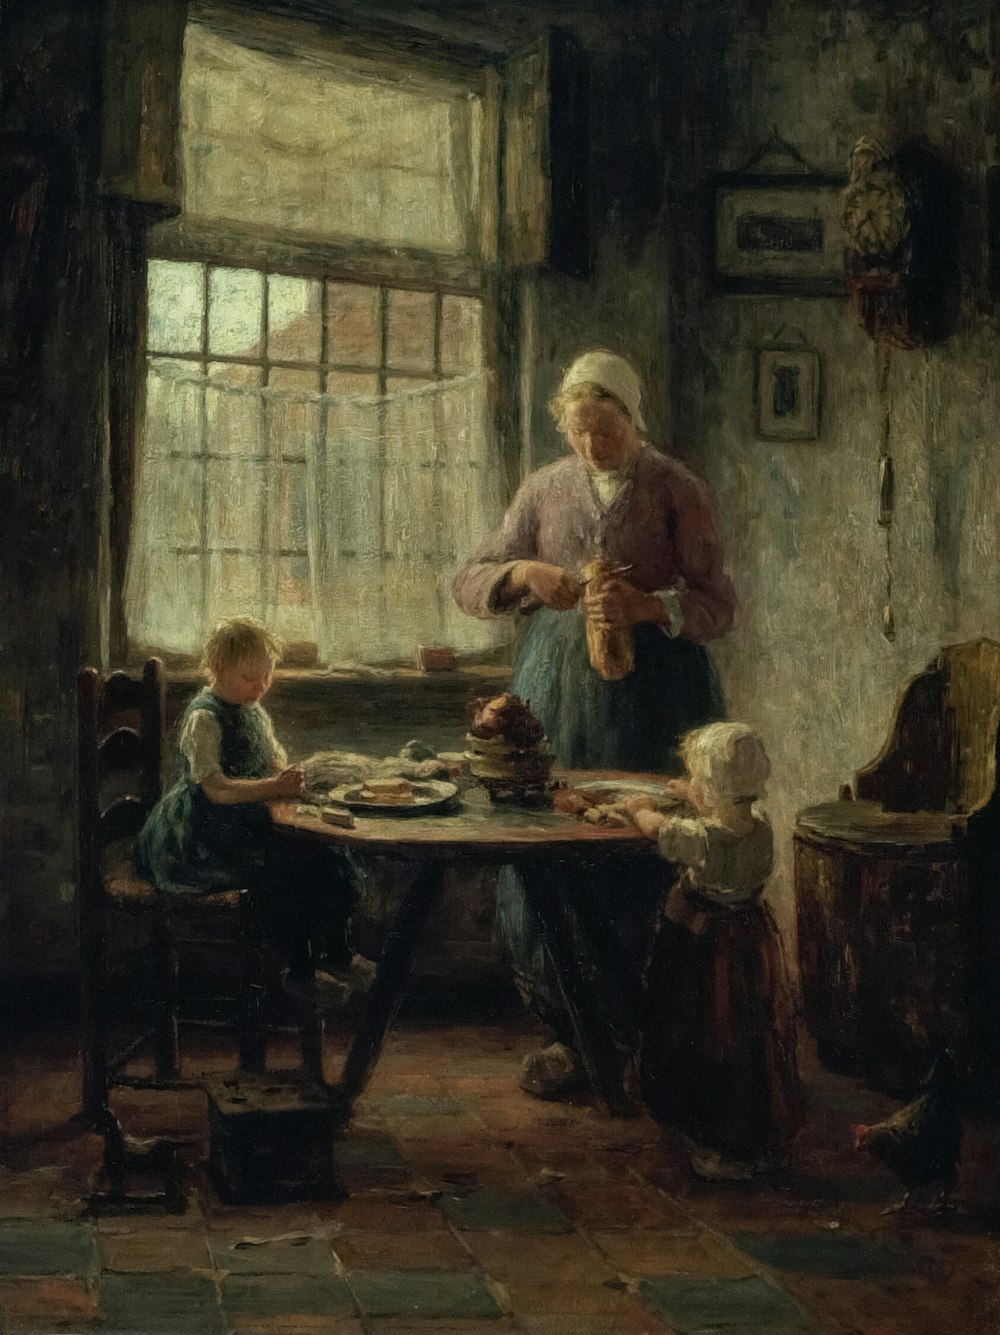 a painting of a woman and a child in a kitchen